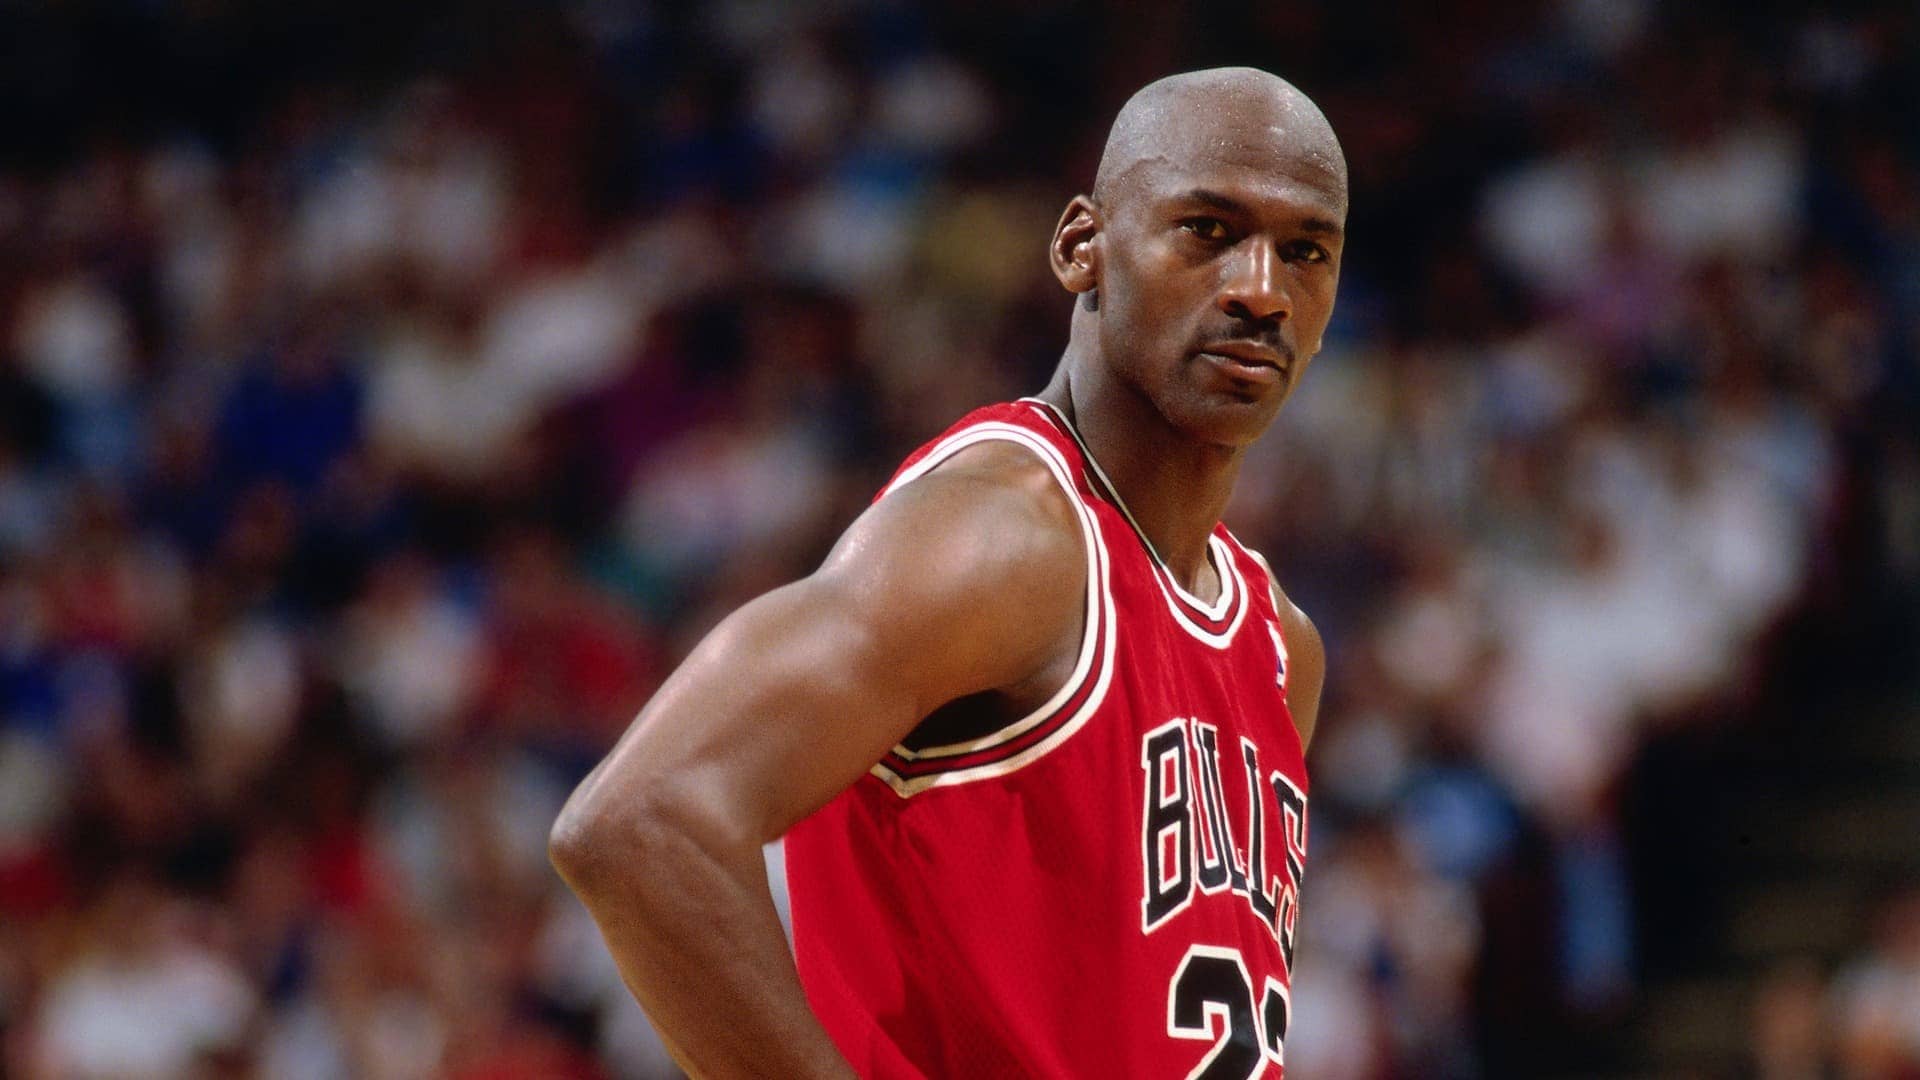 Michael Jordan - NBA players with 60 point games